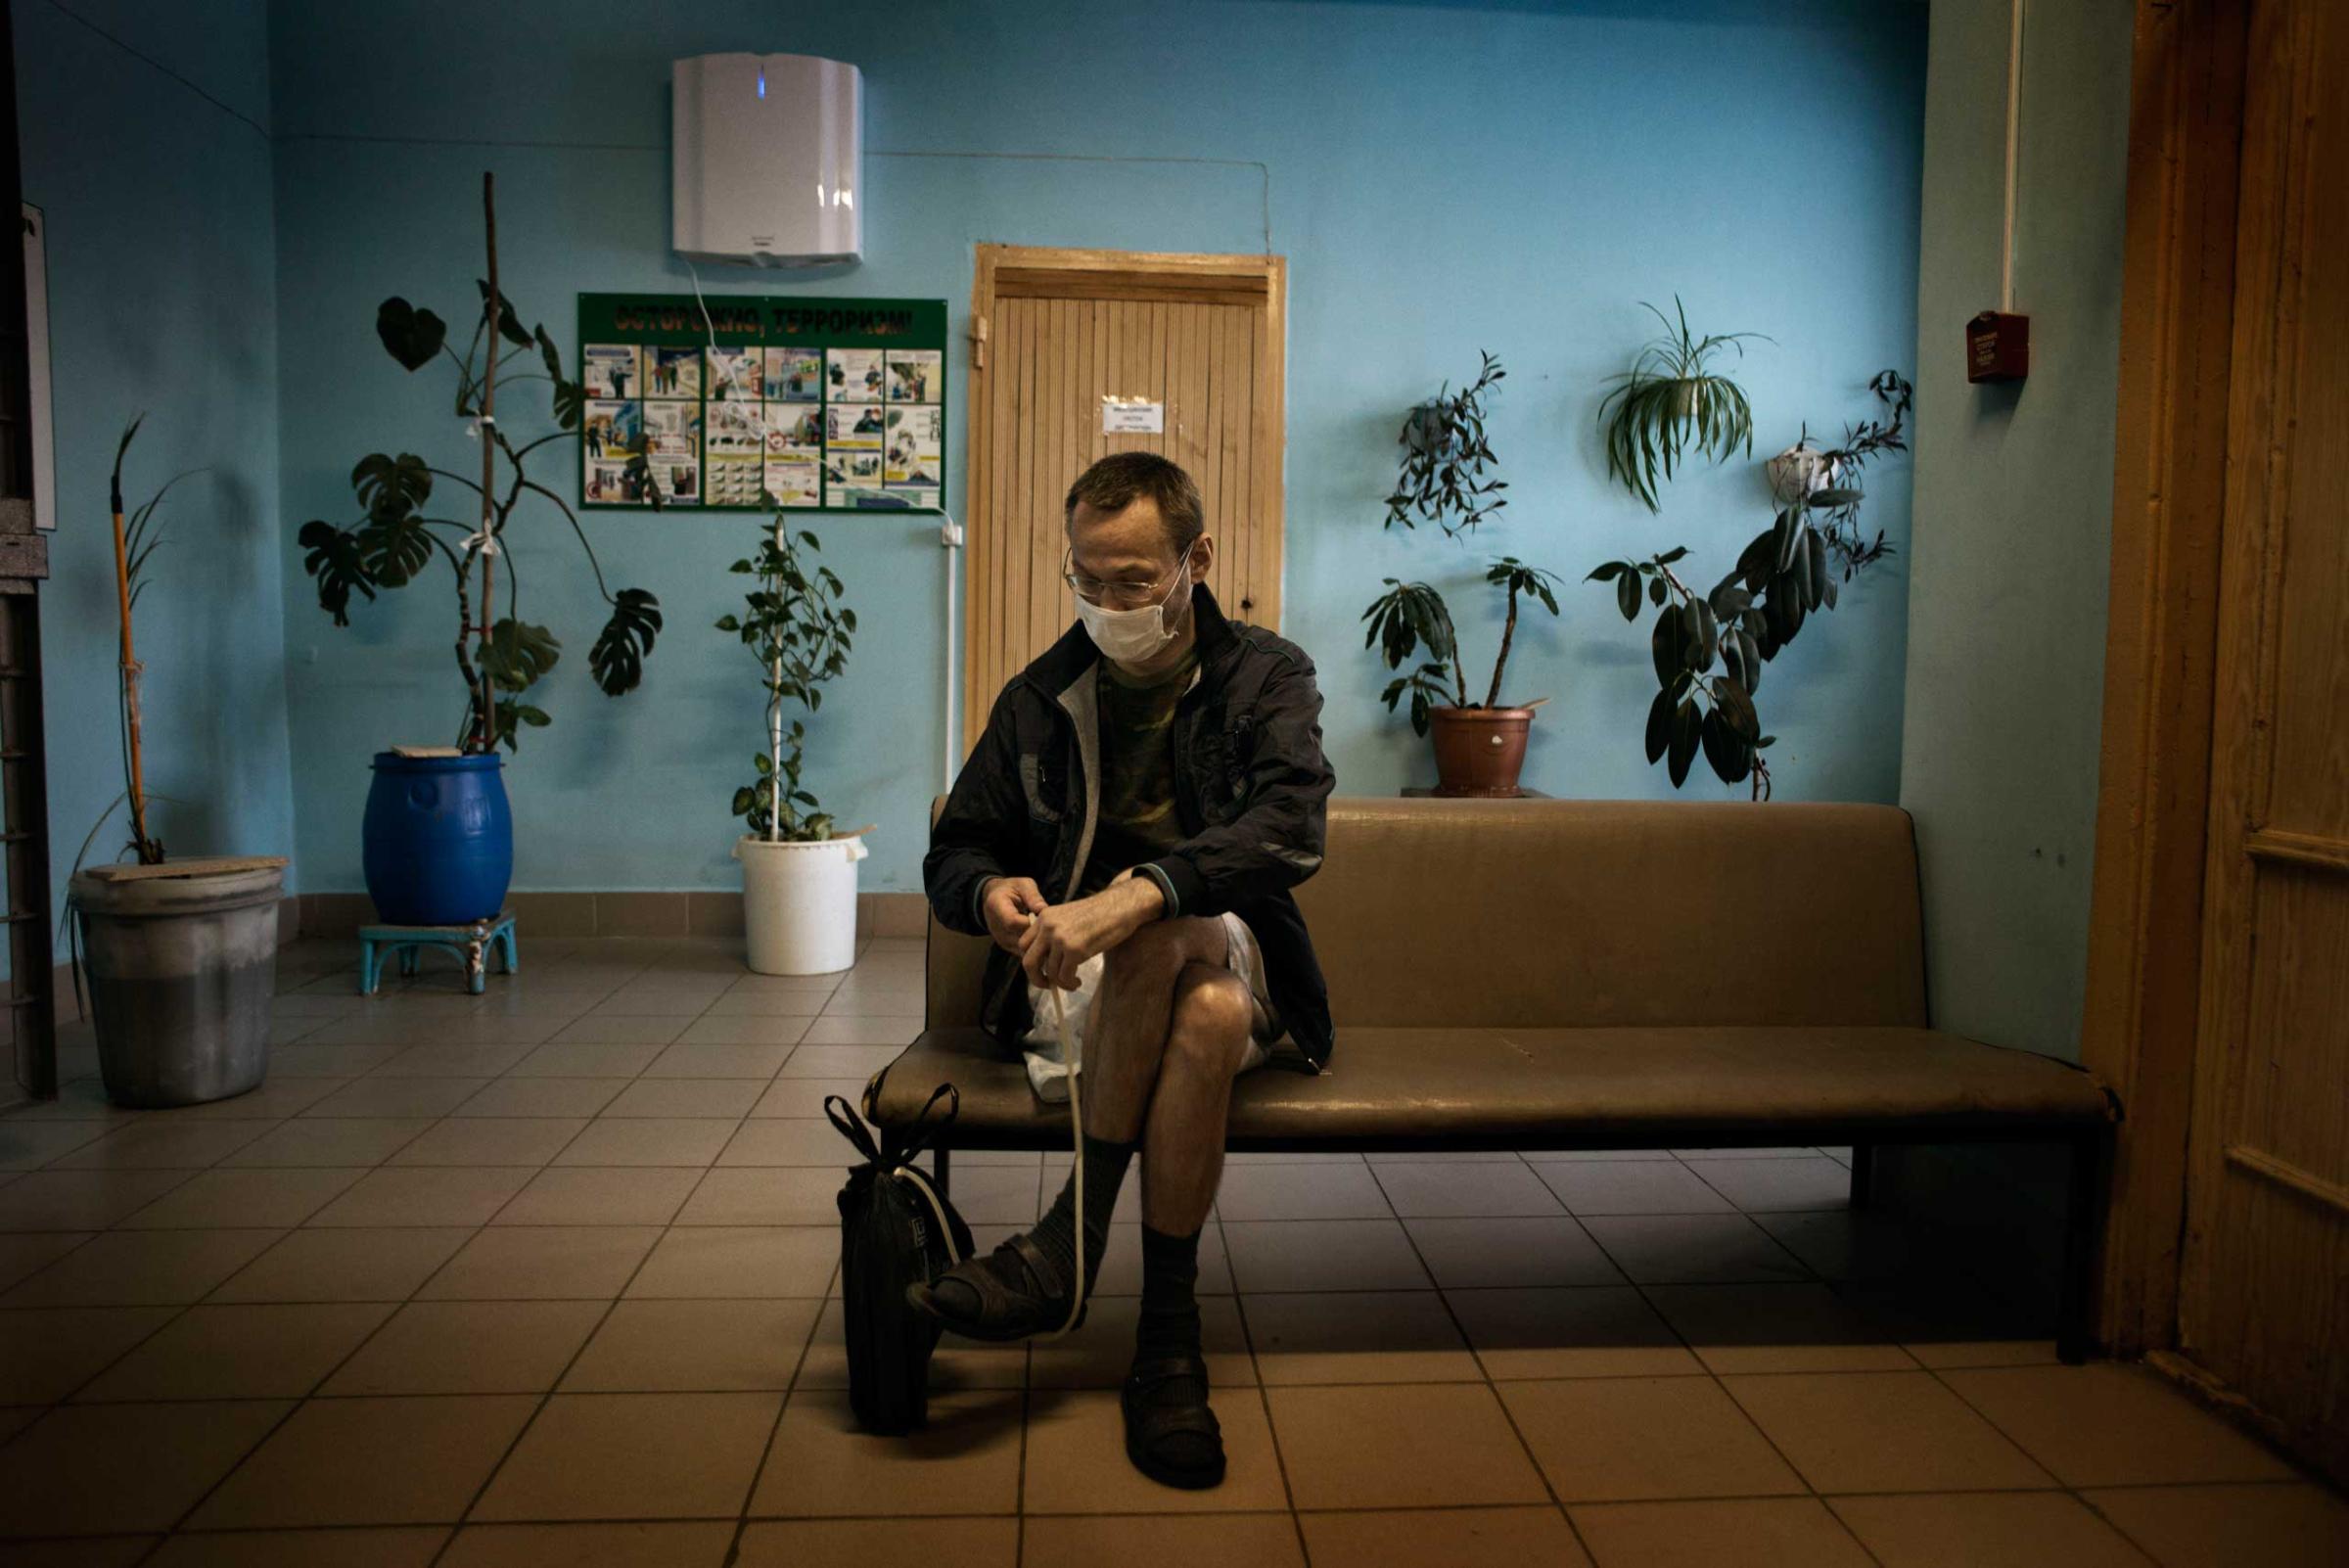 Andrey affected with tuberculosis is in the hospital for over two months. The treatment he is undergoing affects seriously his liver already damaged from a long use of Krokodil.